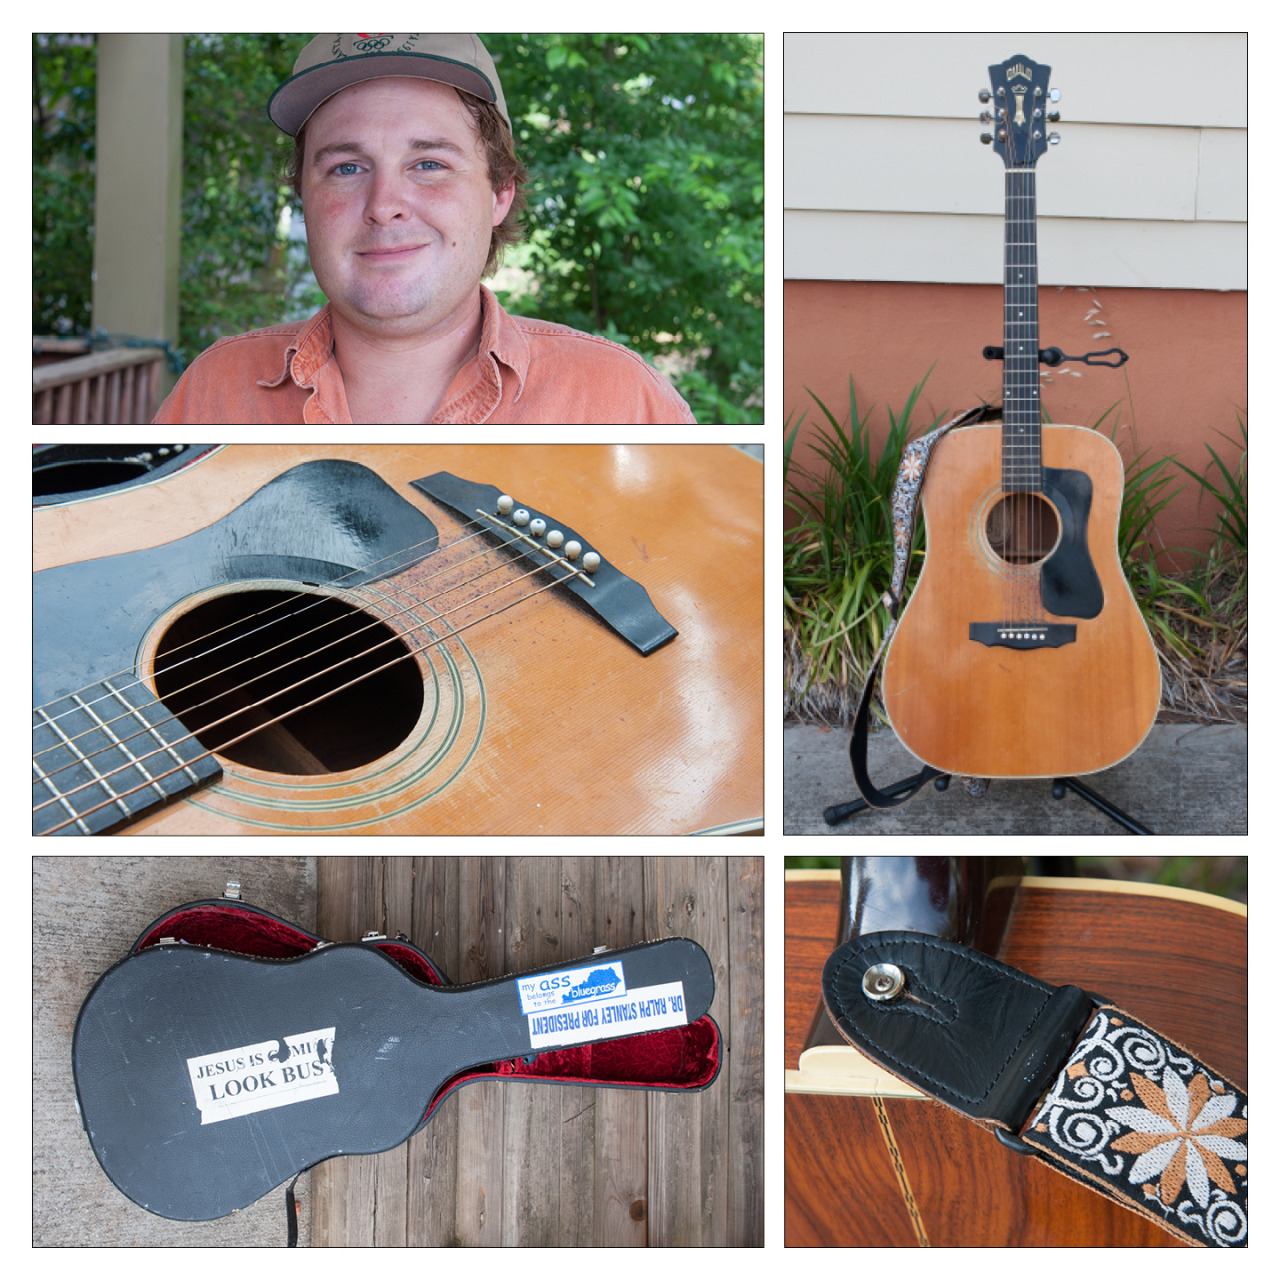 Name: Dan Williams
City: Downtown Atlanta, GA
Instrument:  1976 Guild D-50
My family’s American heritage starts and still largely resides in the southwestern portion of Virginia, same county where Ralph Stanley is from. I fooled around with a lot of styles and music interests before I came around to my roots and started playing bluegrass and Americana stuff in my early 20’s.
Not long after, around the time I had my first “real job” I was doing a good bit of picking with a guy in Rome, GA that ran a nice home studio with several nice vintage instruments. He owned the guitar at the time after having bought it at the venerable Gruhn Guitars in Nashville. Once I started playing it, he could tell faster than I could that it was the guitar I was meant to own, though he hadn’t intended to sell it. He let me buy it off of him in payments over the course of year — which was probably the only way I’d have gotten my hands on such a nice guitar at that stage in my life.
I tend to play in a way that’s pretty percussive, which I think sort of goes back to listening to a lot of Richie Havens when I was first teaching myself to play as a kid. Havens, as it happens, was a big fan of Guilds. So as bluegrass-type players go, I’m short on finesse and long on beating the hell out of a guitar, basically; hence the steady buildup of blood over the bridge.
The 70’s era guild dreadnoughts respond with a big low end and a loud, rich sound. They are also built like absolute tanks, which is great for me as one that would probably ruined a more delicate guitar of its caliber years ago. Guild is owned by fender now, and a few years ago reissued the D-50s for about three times what you can get a good vintage one for.
If anything ever happened to it, I’d be out looking for another 70’s era D-series just like it the next day. At this point I&rsquo;d feel pretty lost in life without one of these to bang on.
Band name: Sweet Auburn String Band